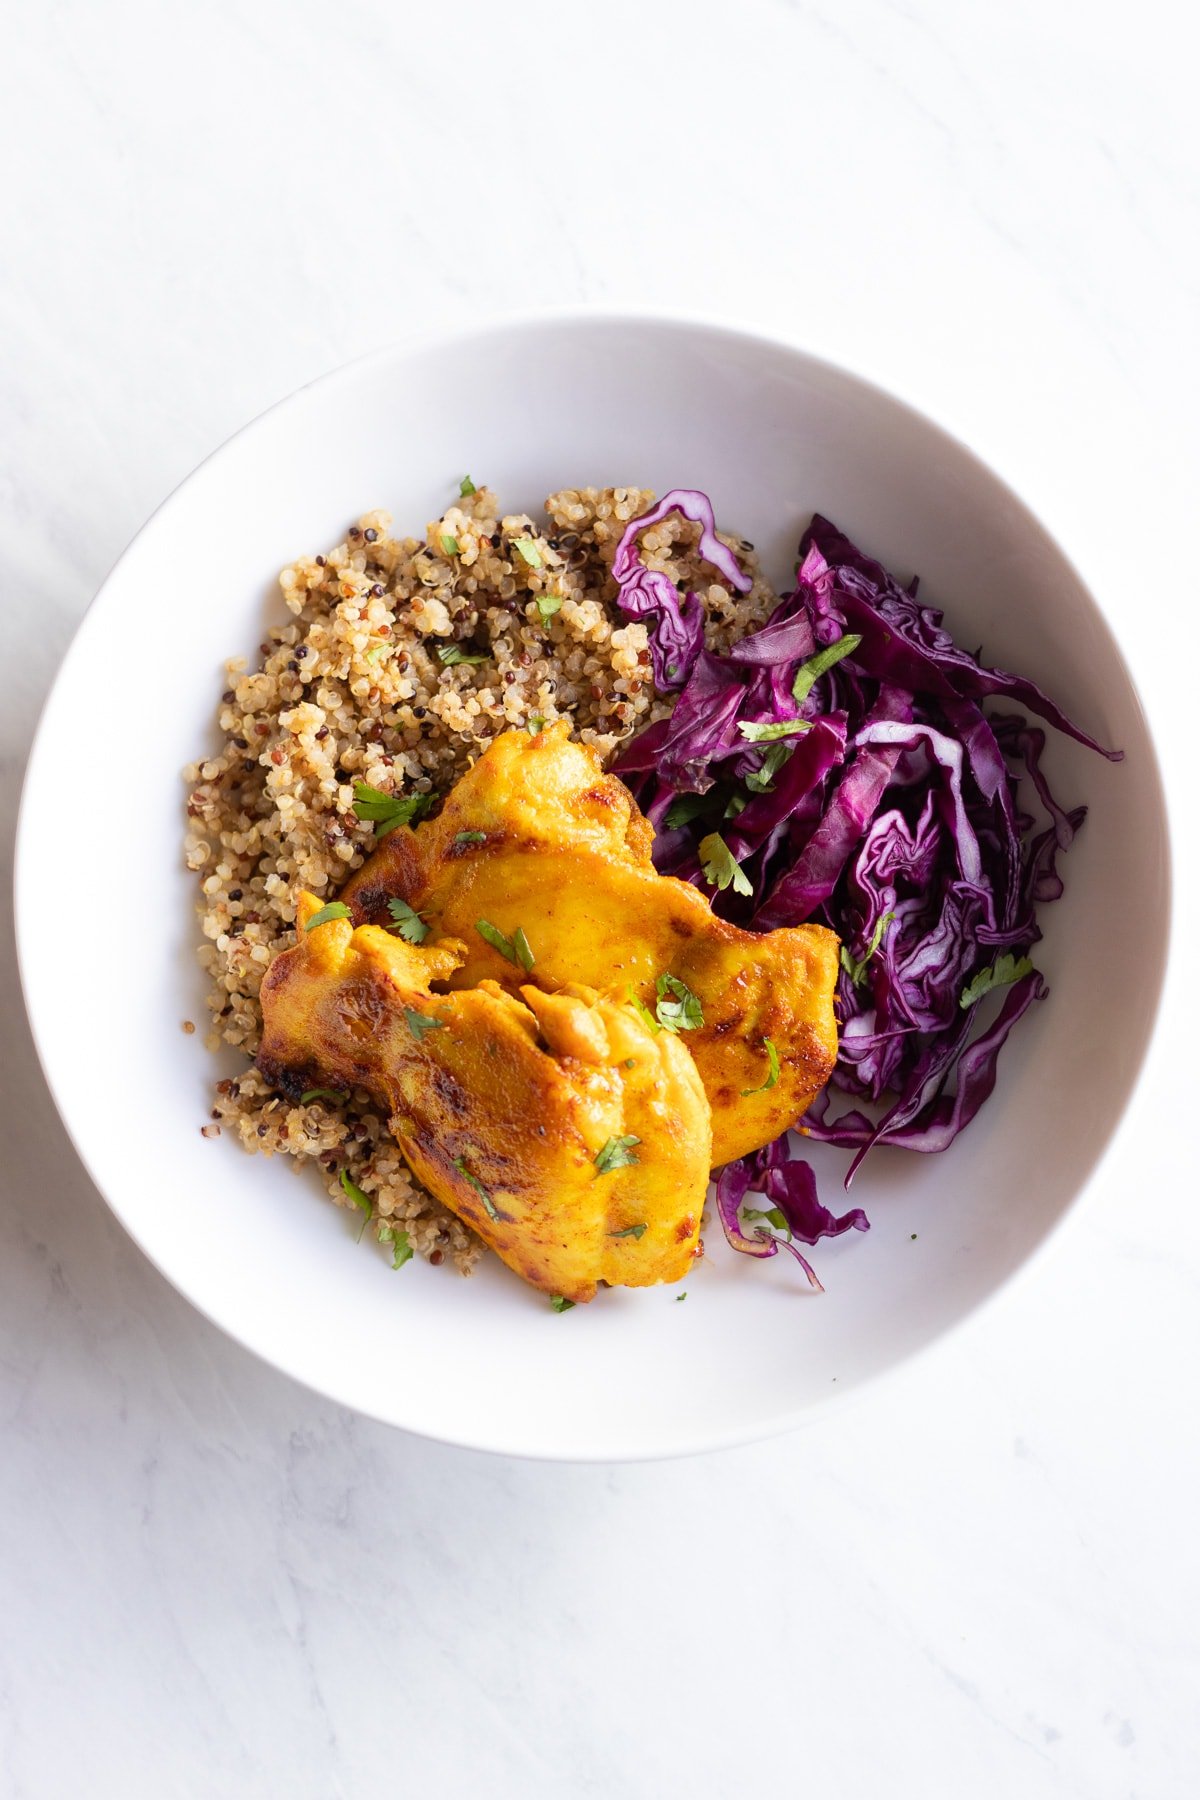 Looking down at a bowl of lemon-spiced chicken, red cabbage, and tri-color quinoa.